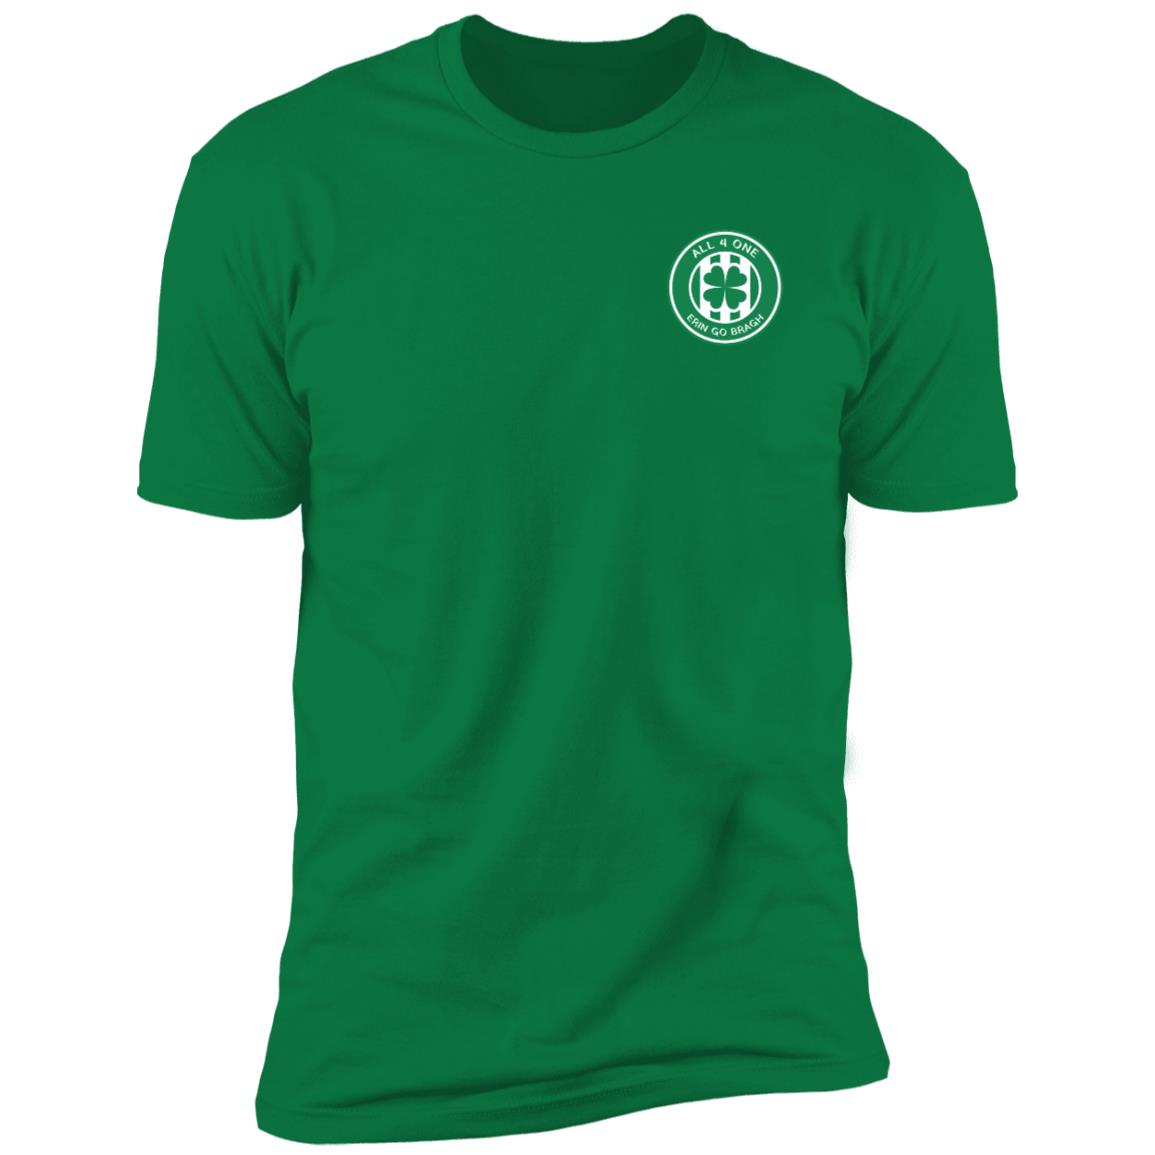 All 4 One St. Patrick's Day Premium Short Sleeve T-Shirt